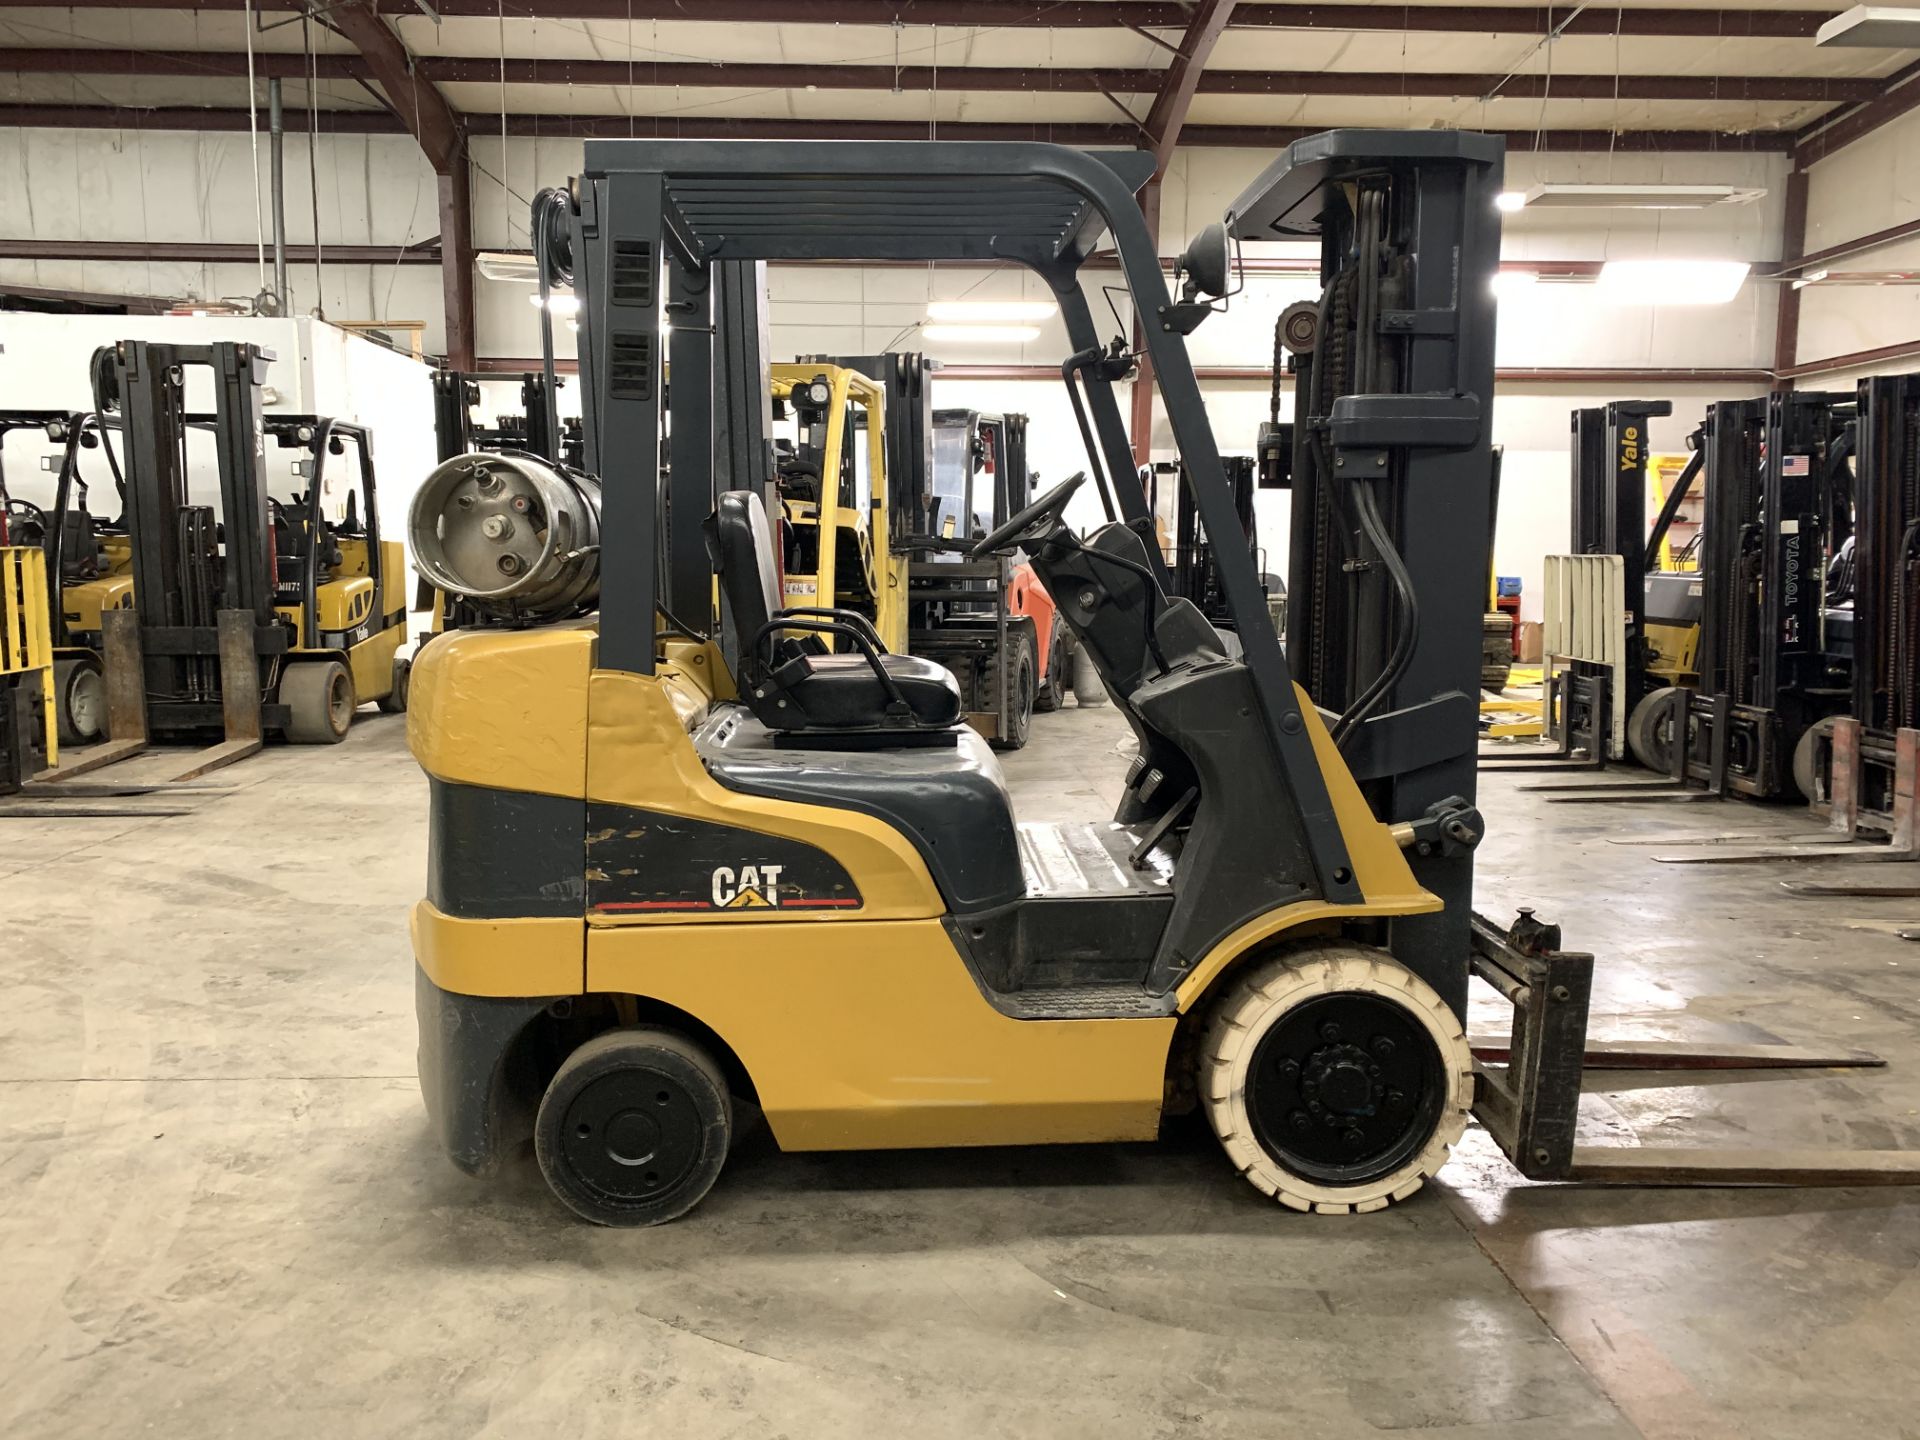 2006 CATERPILLAR 5,000-LB. CAPACITY FORKLIFT, MODEL: C5000, LPG, SOLID TIRES, 3-STAGE MAST - Image 3 of 6